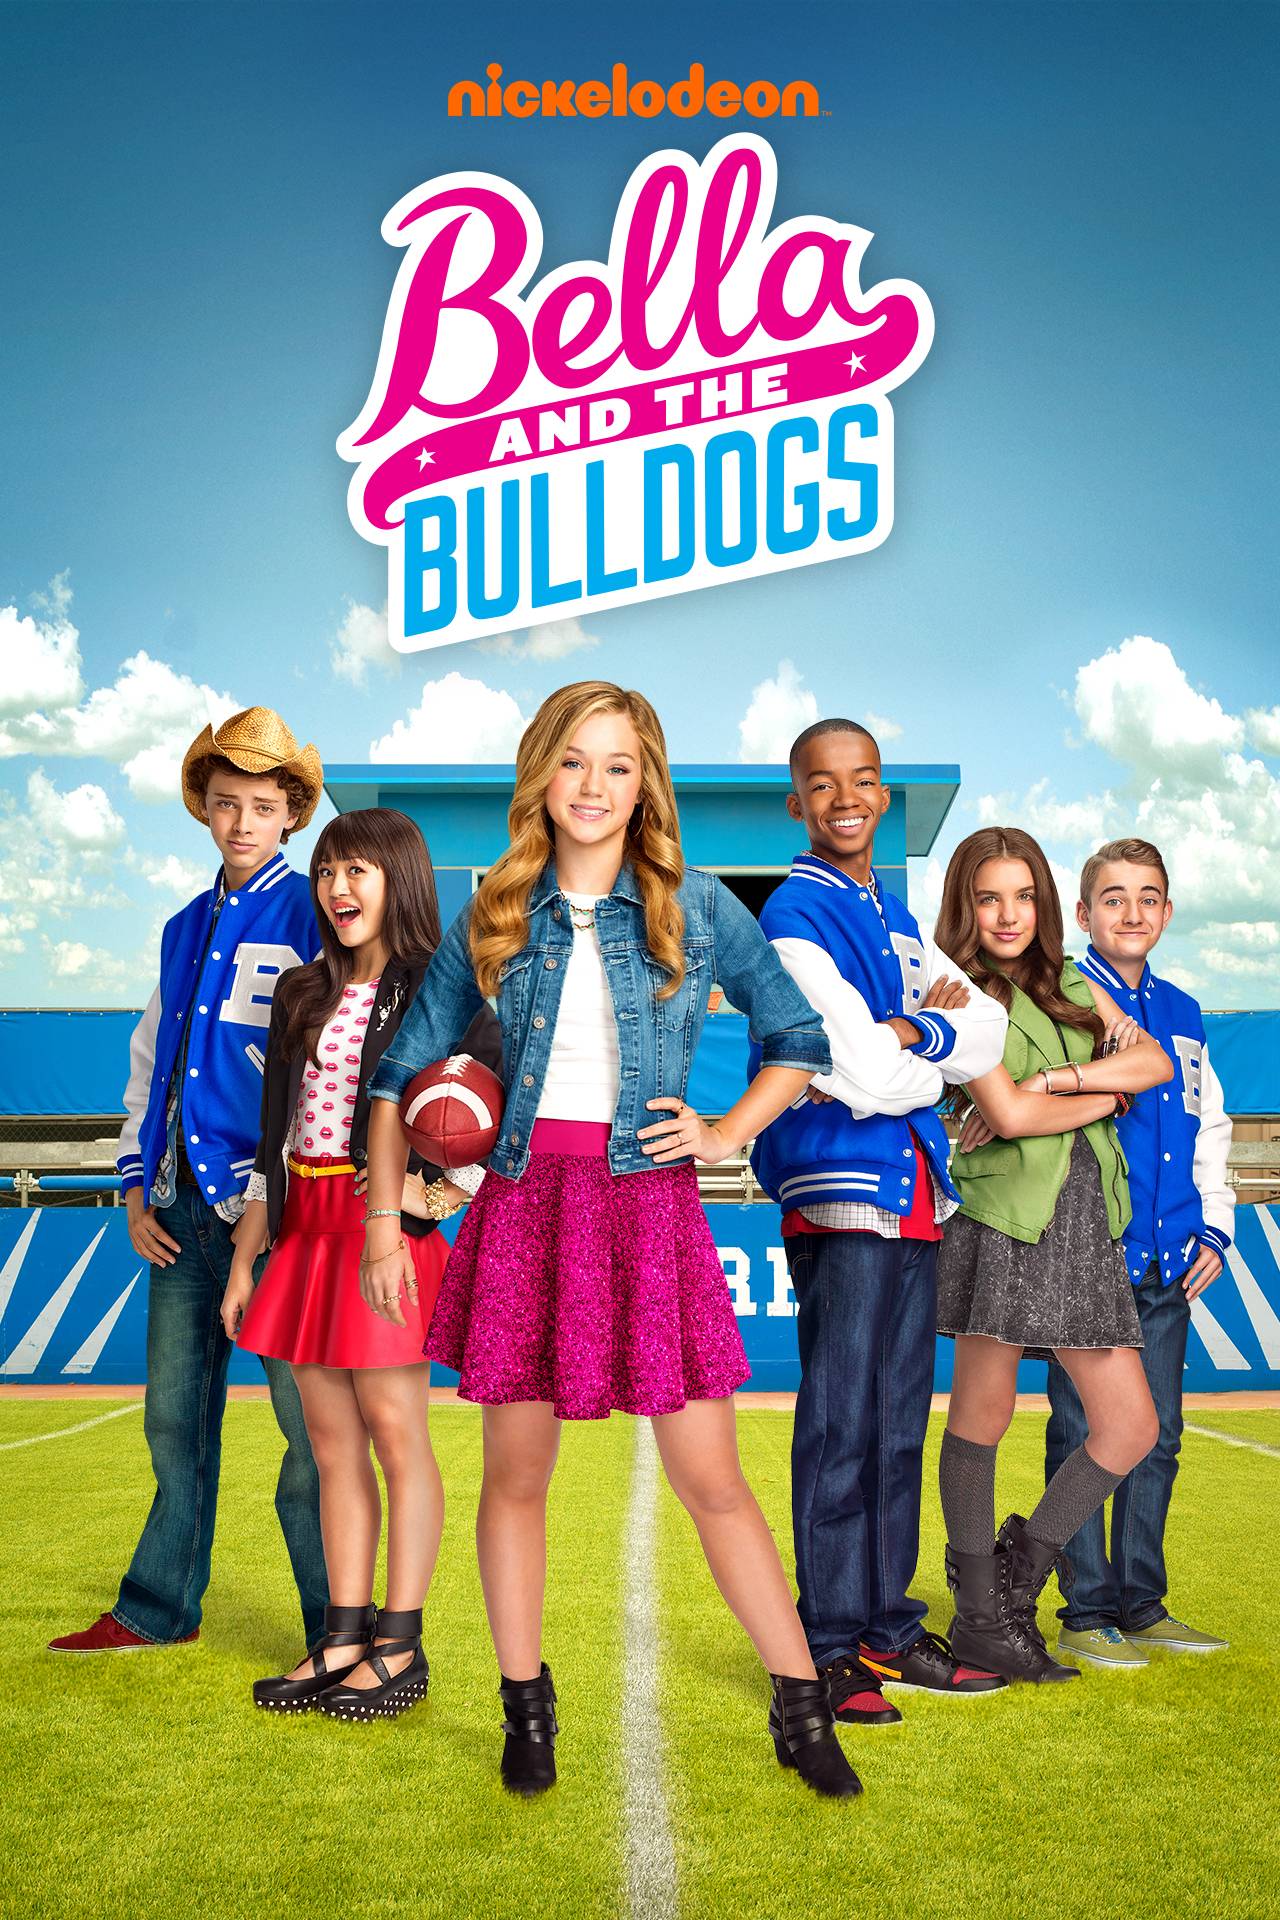 Stream One of the Boys (Bella And The Bulldogs Theme Song) by